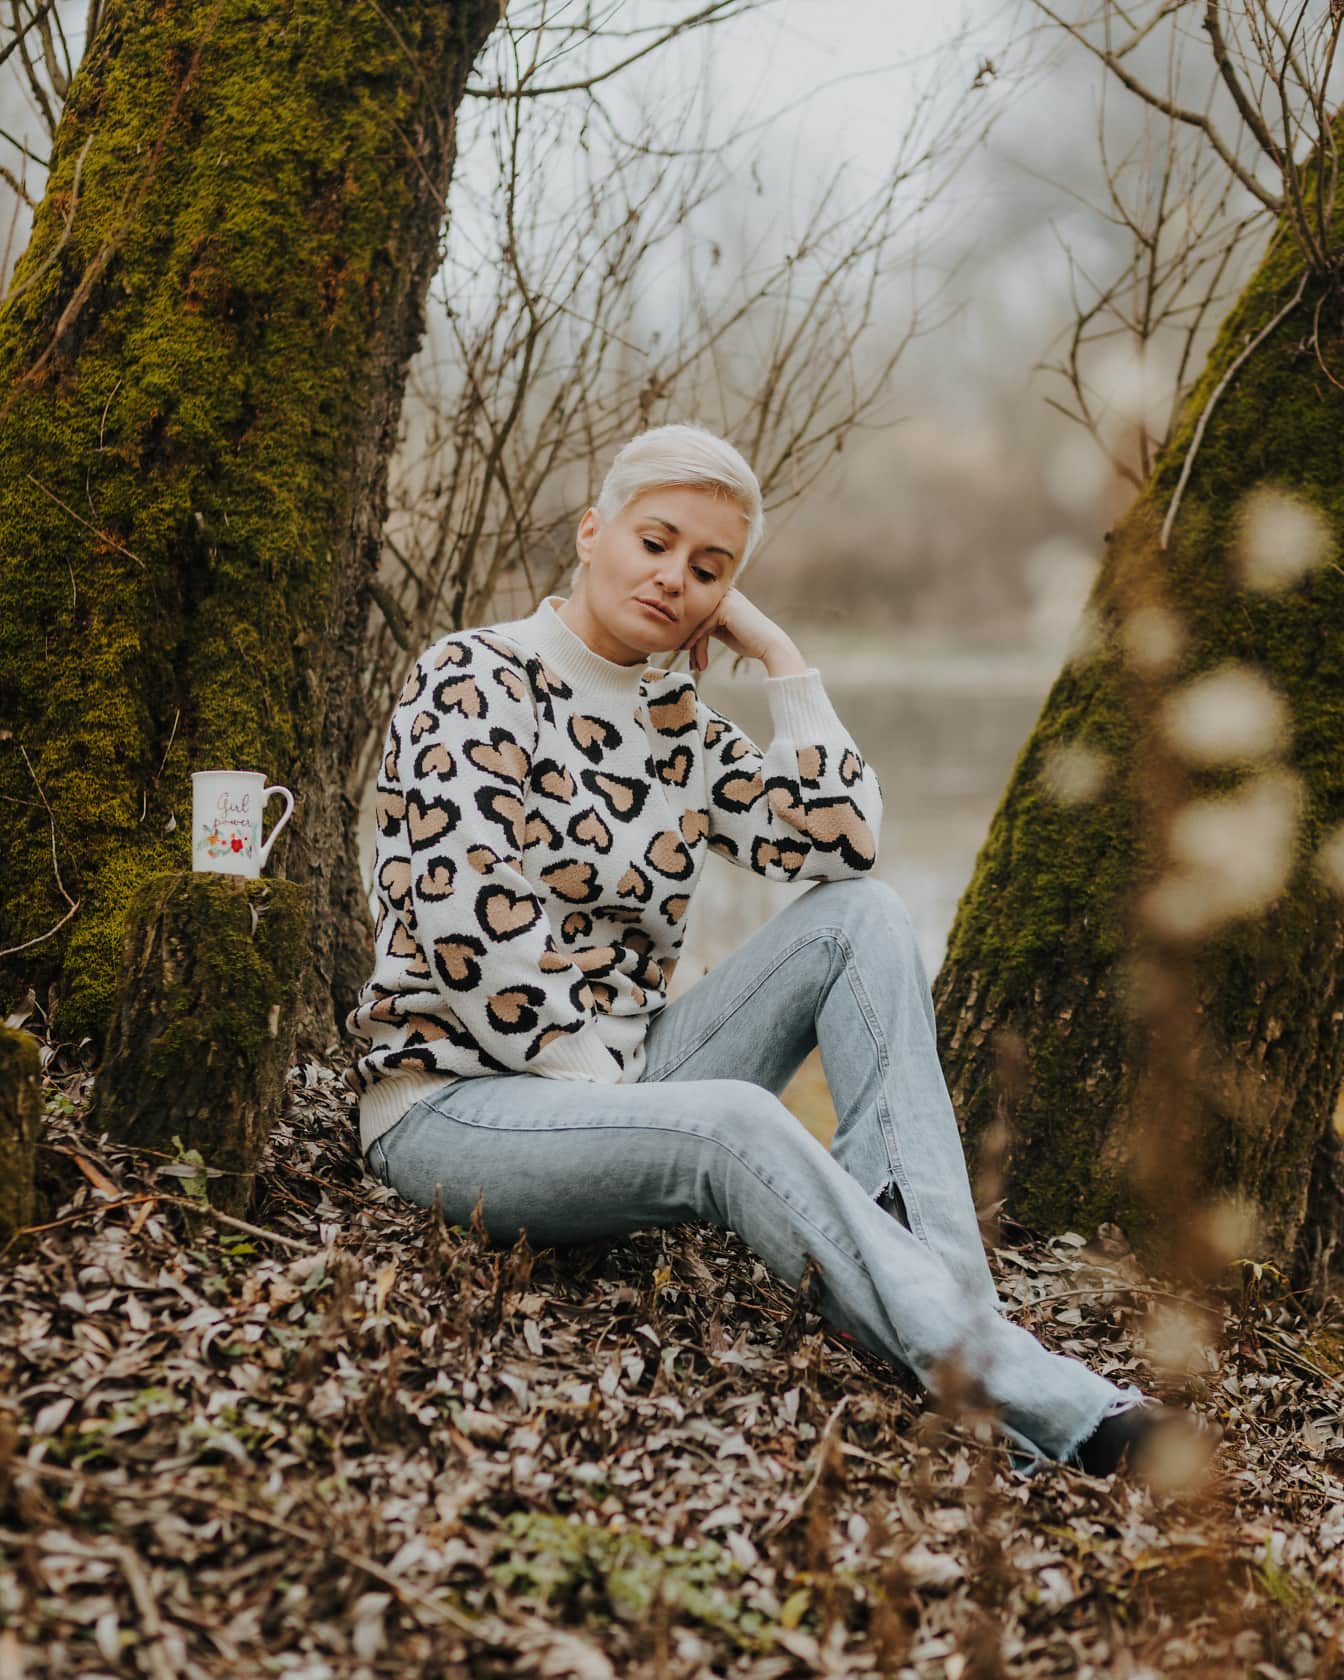 Short hair blonde sitting in sweater and jeans pants